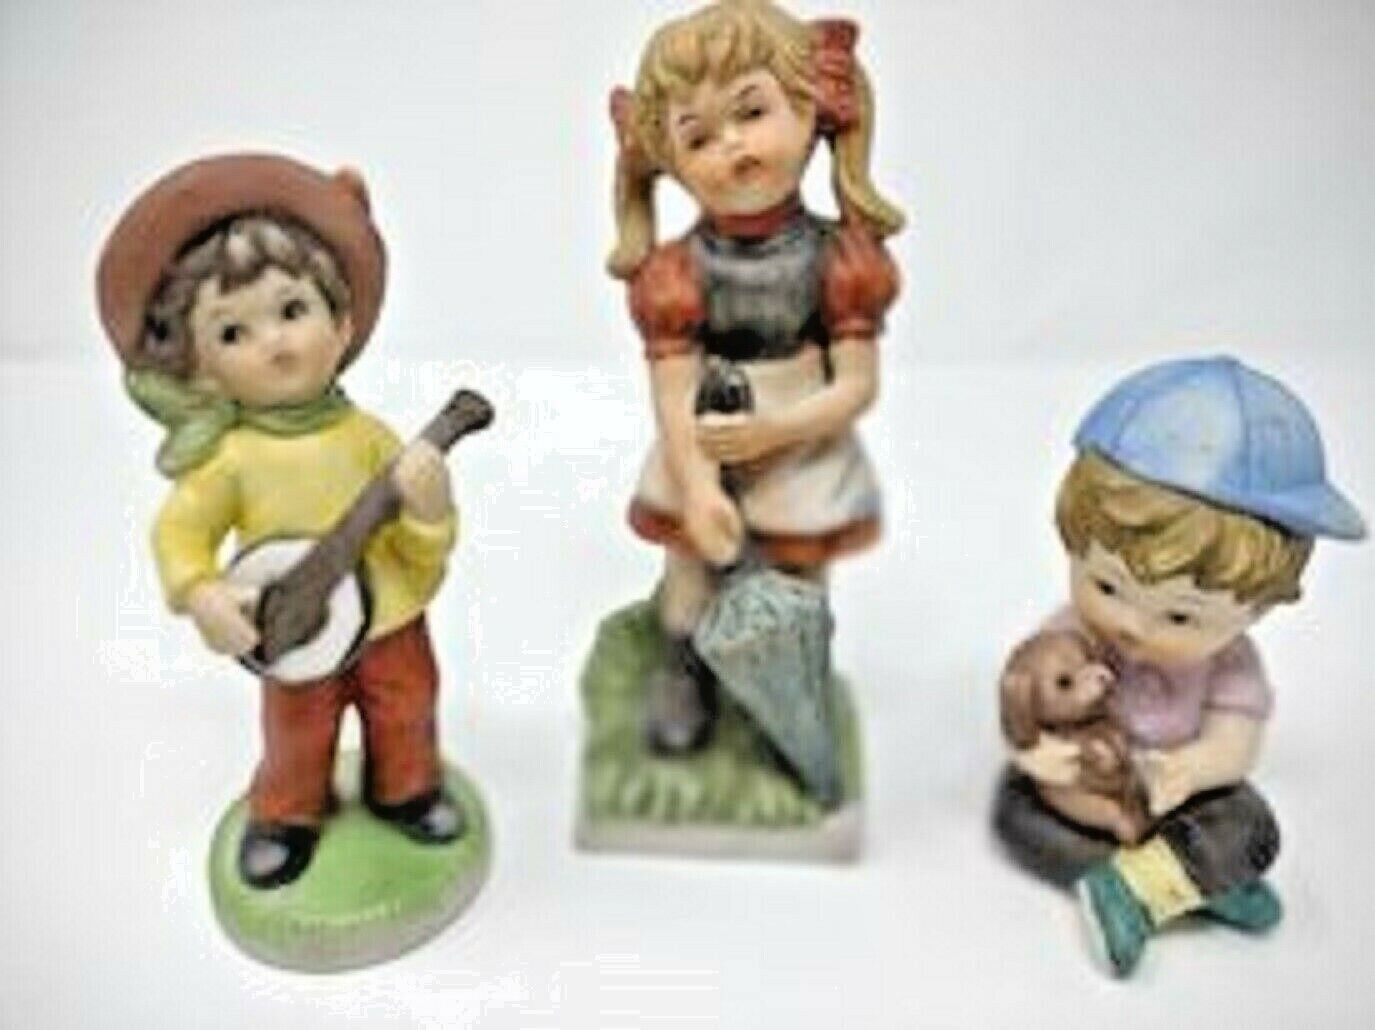 Ceramic Figures, Little Girl, Little Boy with Banjo and Little Boy with Puppy